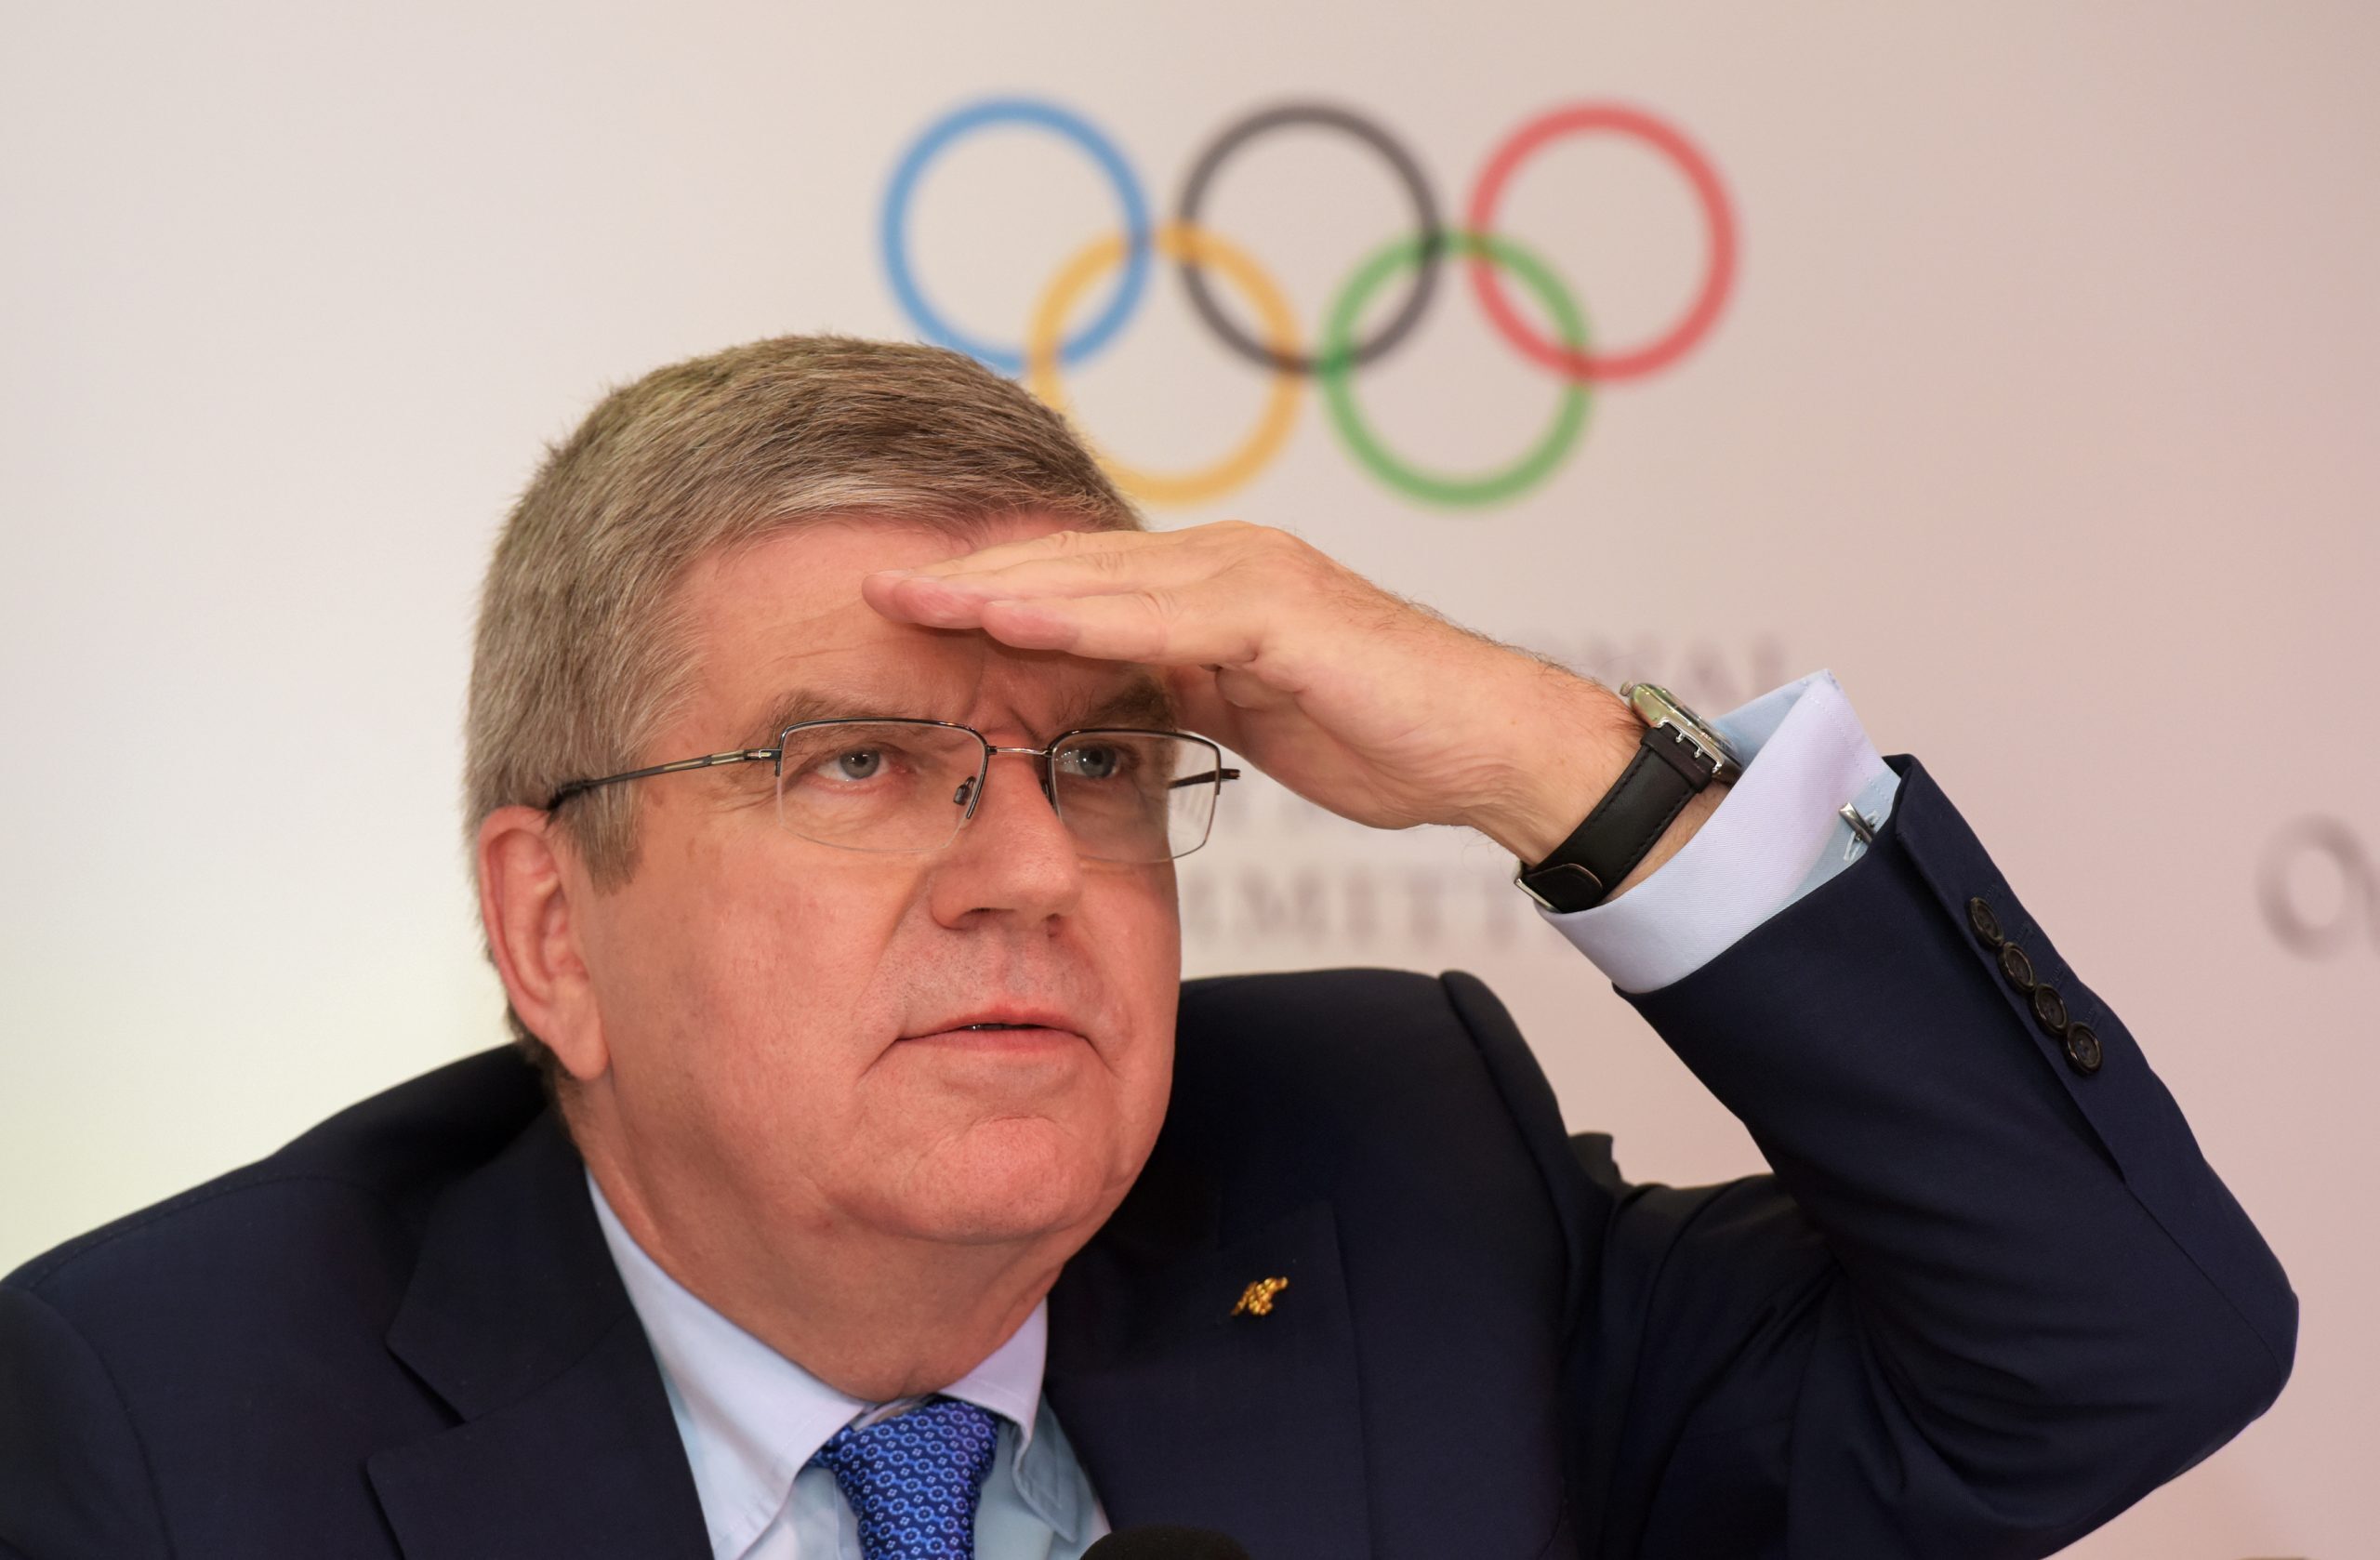 IOC chief Thomas Bach insisted April 19 that "killer" computer games would never be part of the Olympics. (Getty Images)